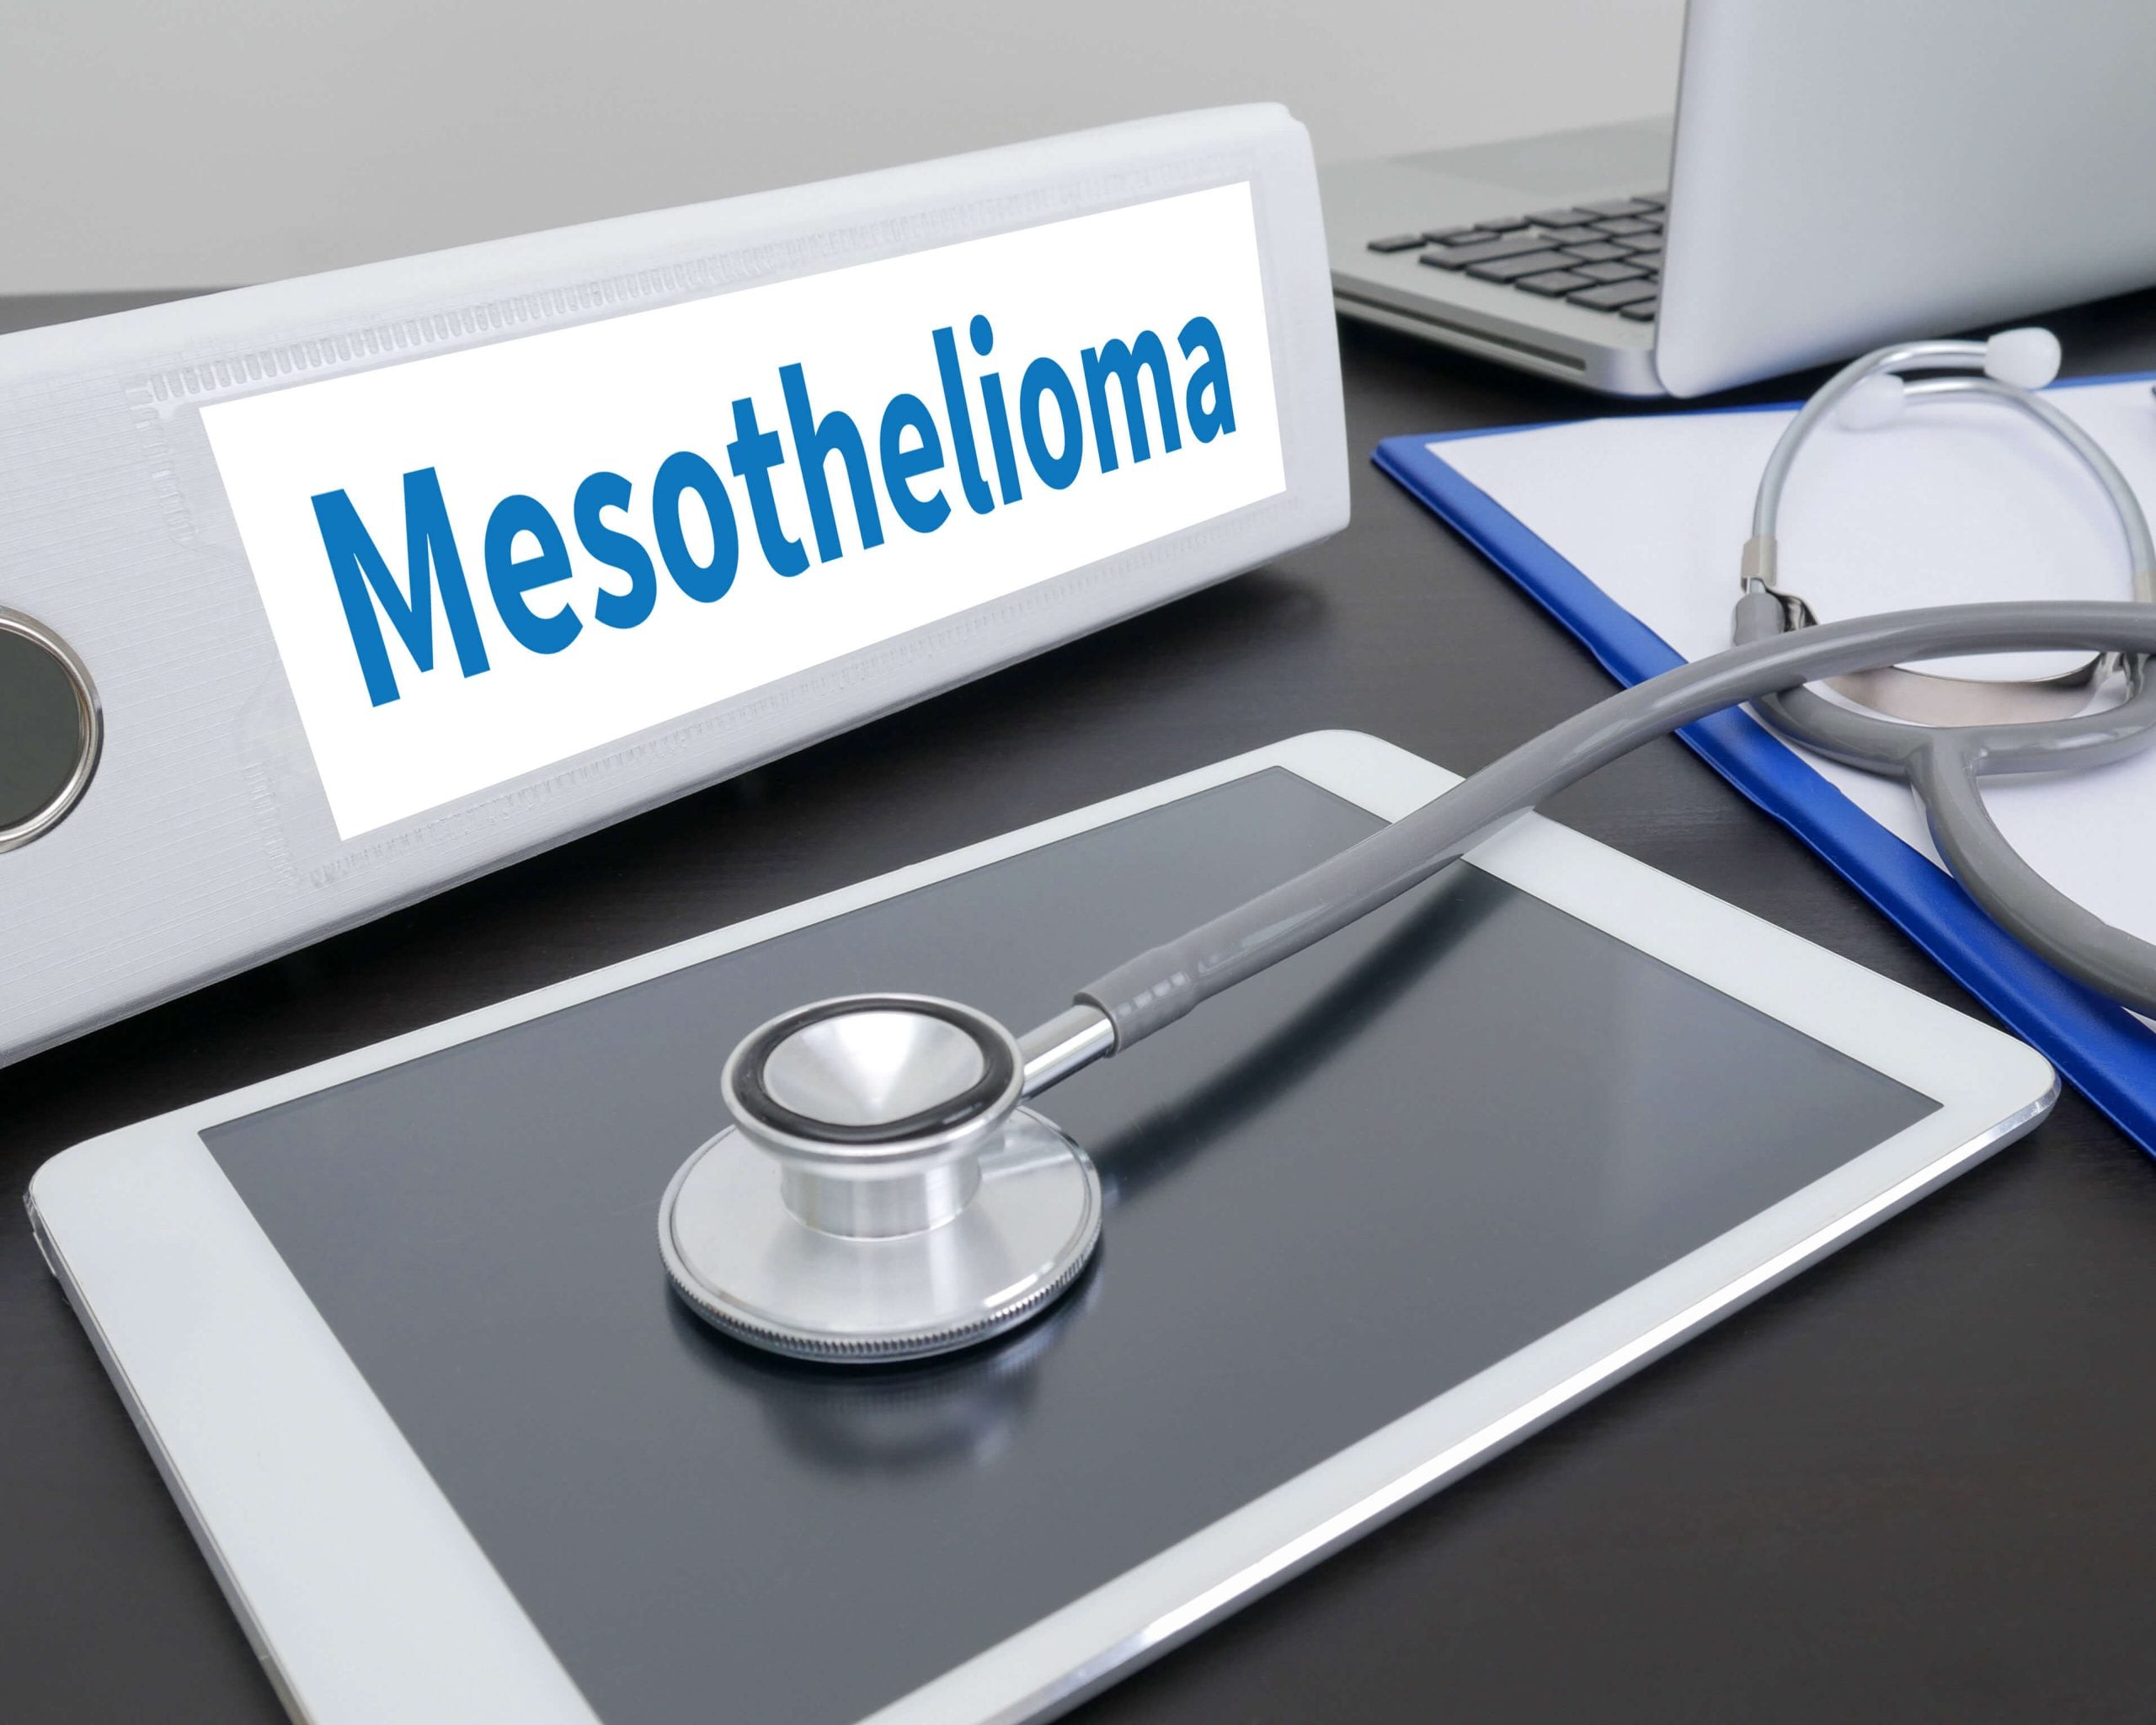 Stages-of-Mesothelioma in Newport